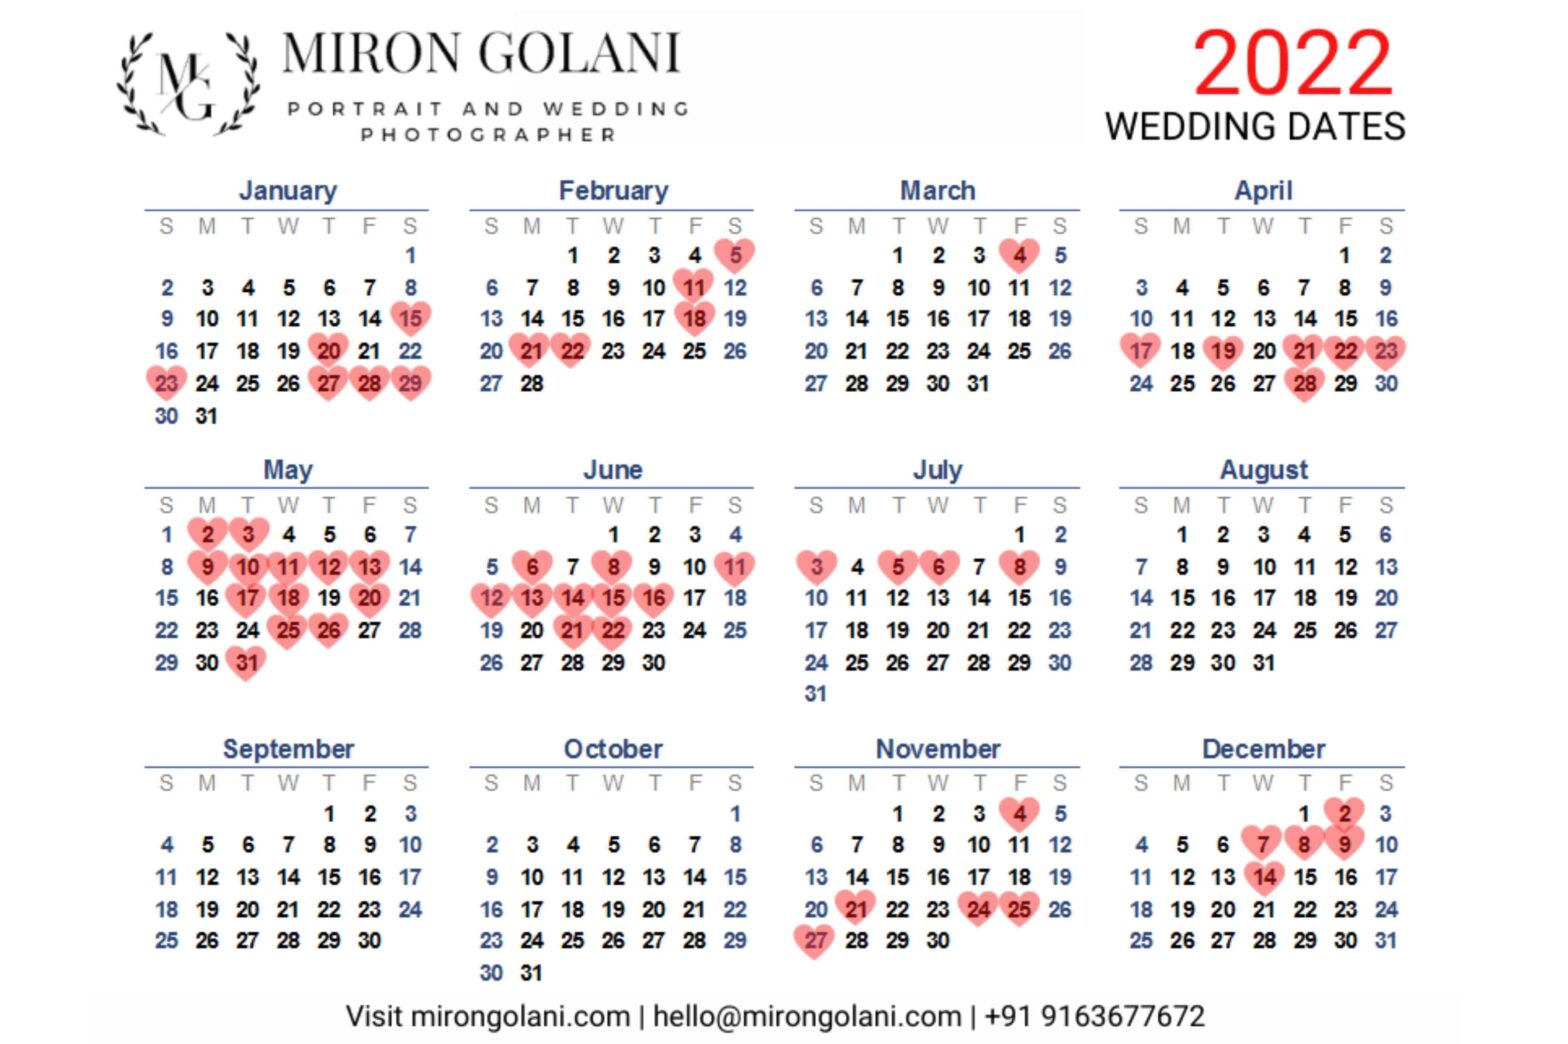 Auspicious Marriage Dates in 2022 - Wedding Dates in 2022 - Miron Golani's Photography